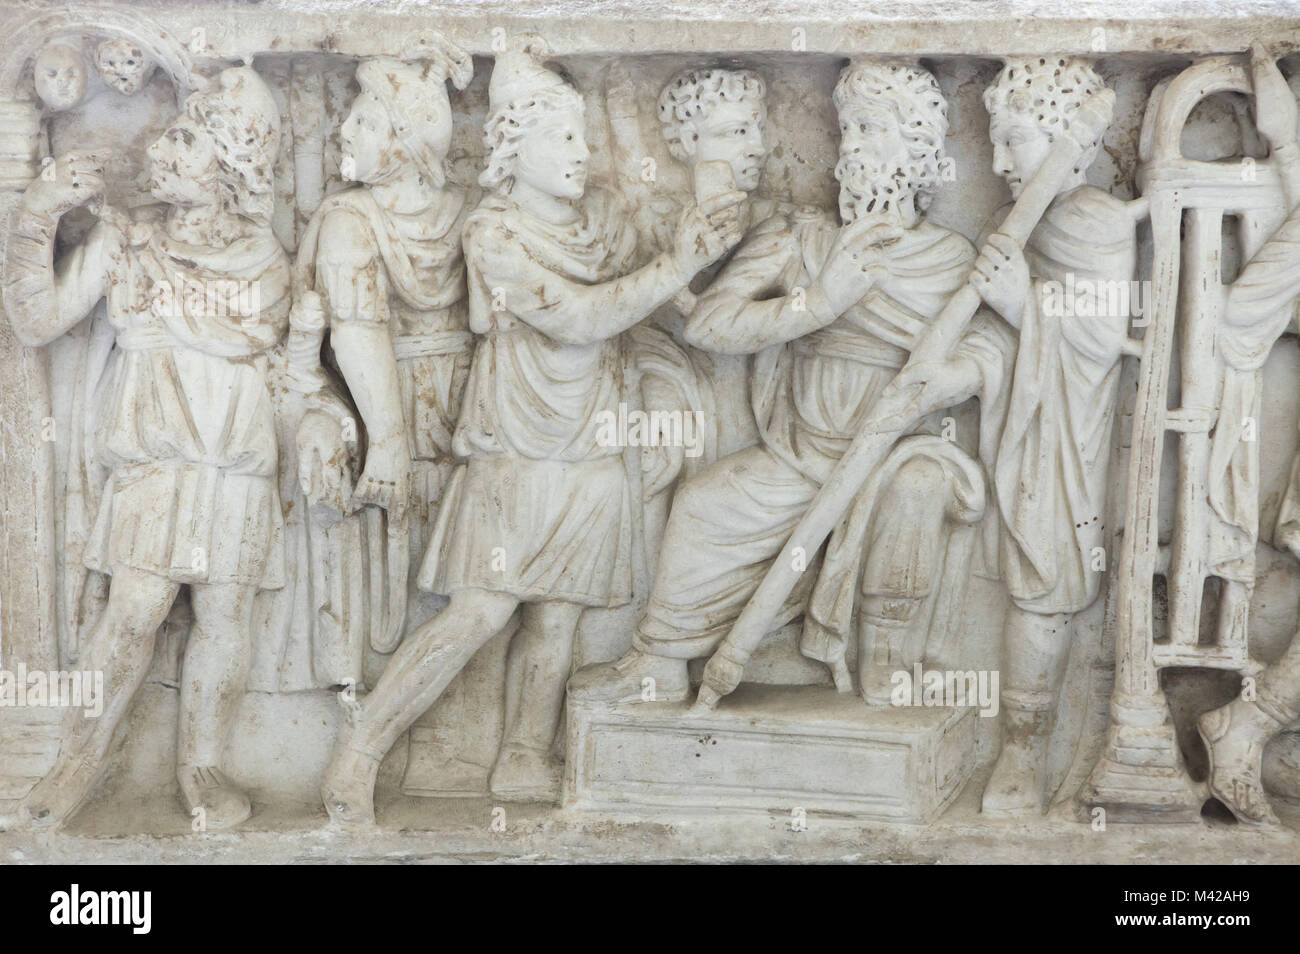 Pelops and King Oenomaus. Roman marble sarcophagus from the 4th century AD on display in the National Archaeological Museum in Naples, Campania, Italy. Stock Photo